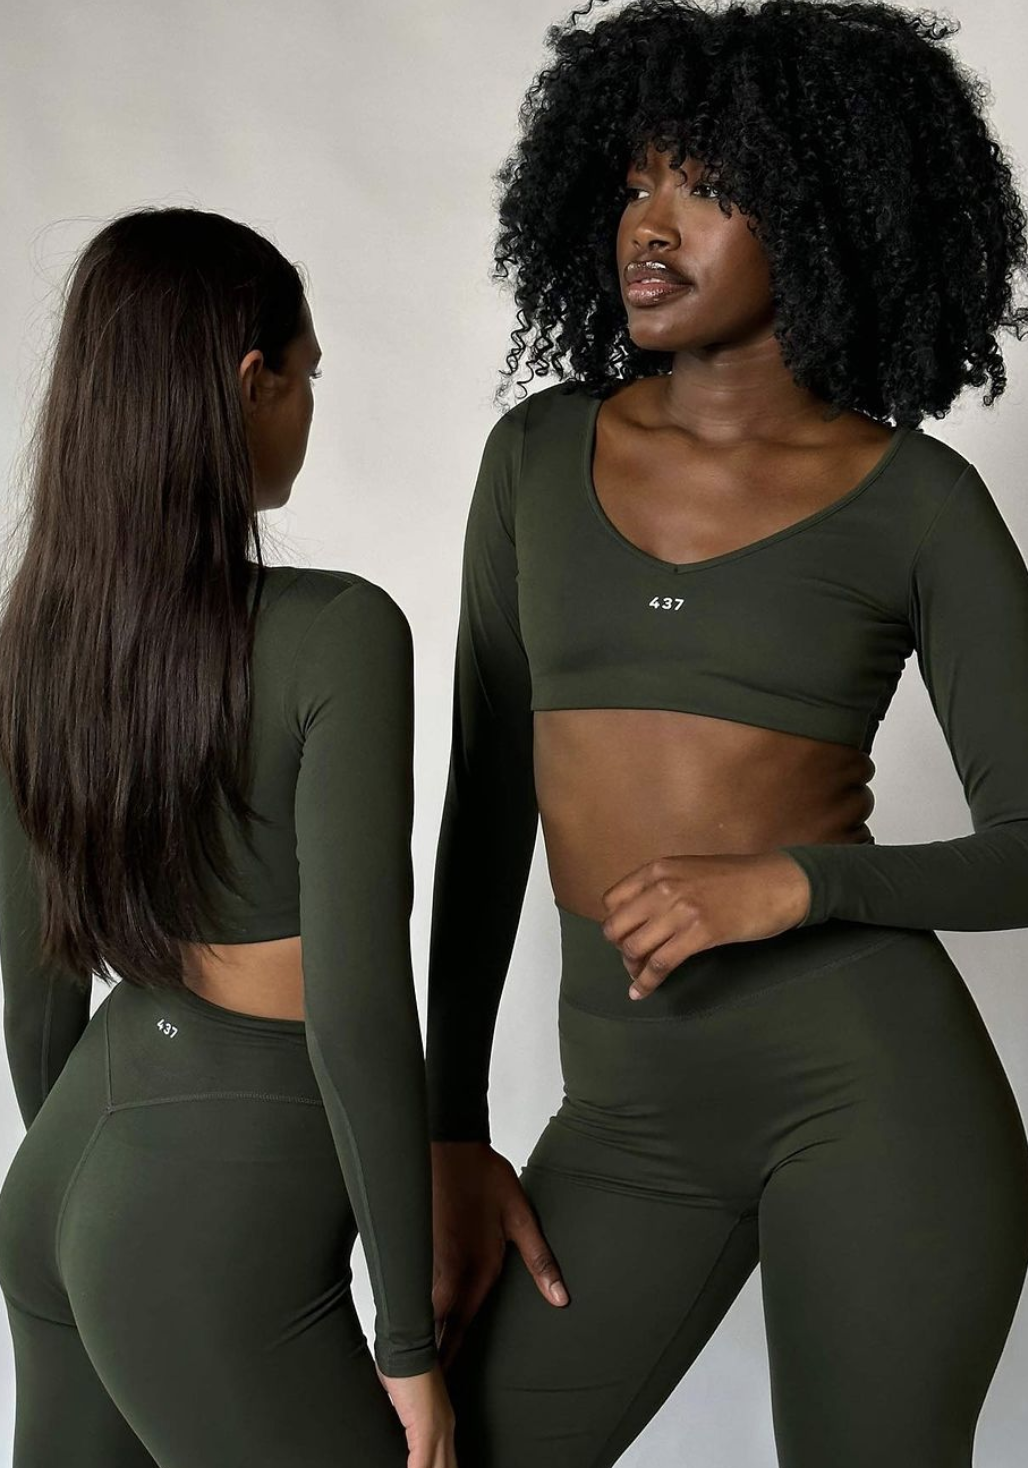 Two women pose in dark green athletic body suits that read &quot;437&quot; in small print.